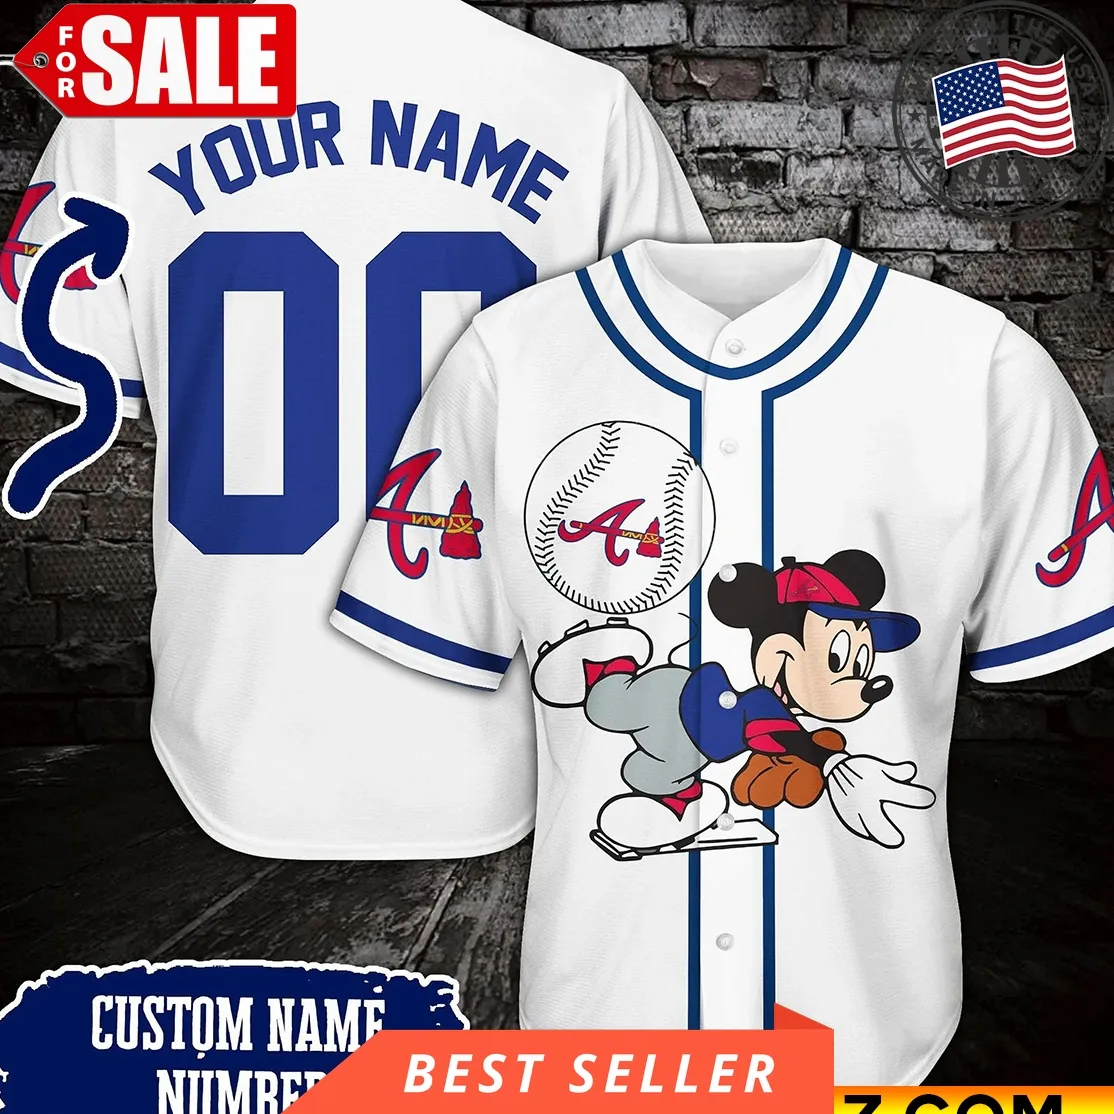 Custom Name And Number Logo Atlanta Braves X Disney Mickey Throwball Baseball Jersey Size up S to 5XL Trending